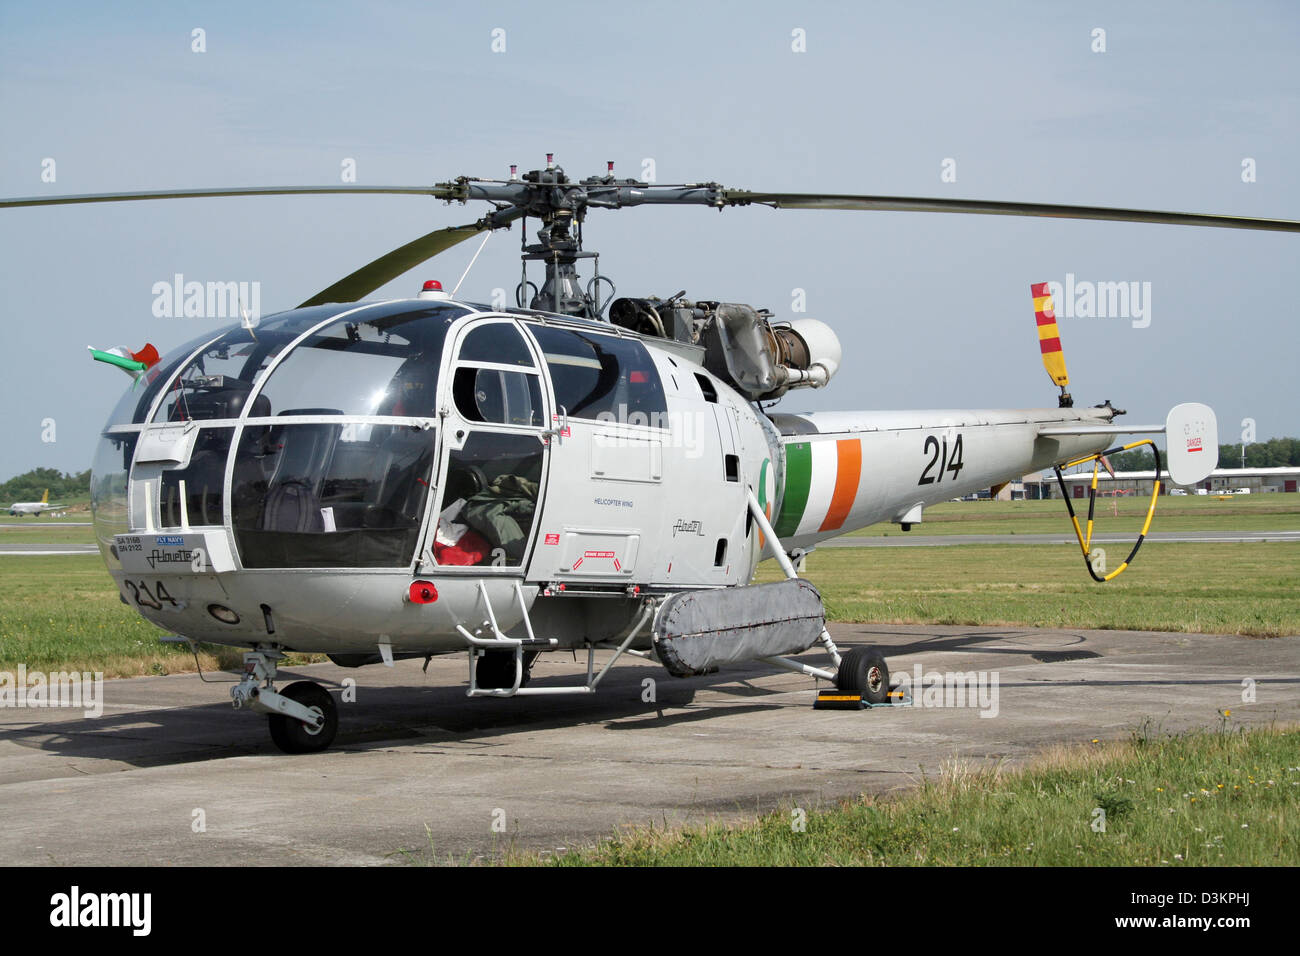 Rish Air Corps hélicoptère Alouette III Banque D'Images